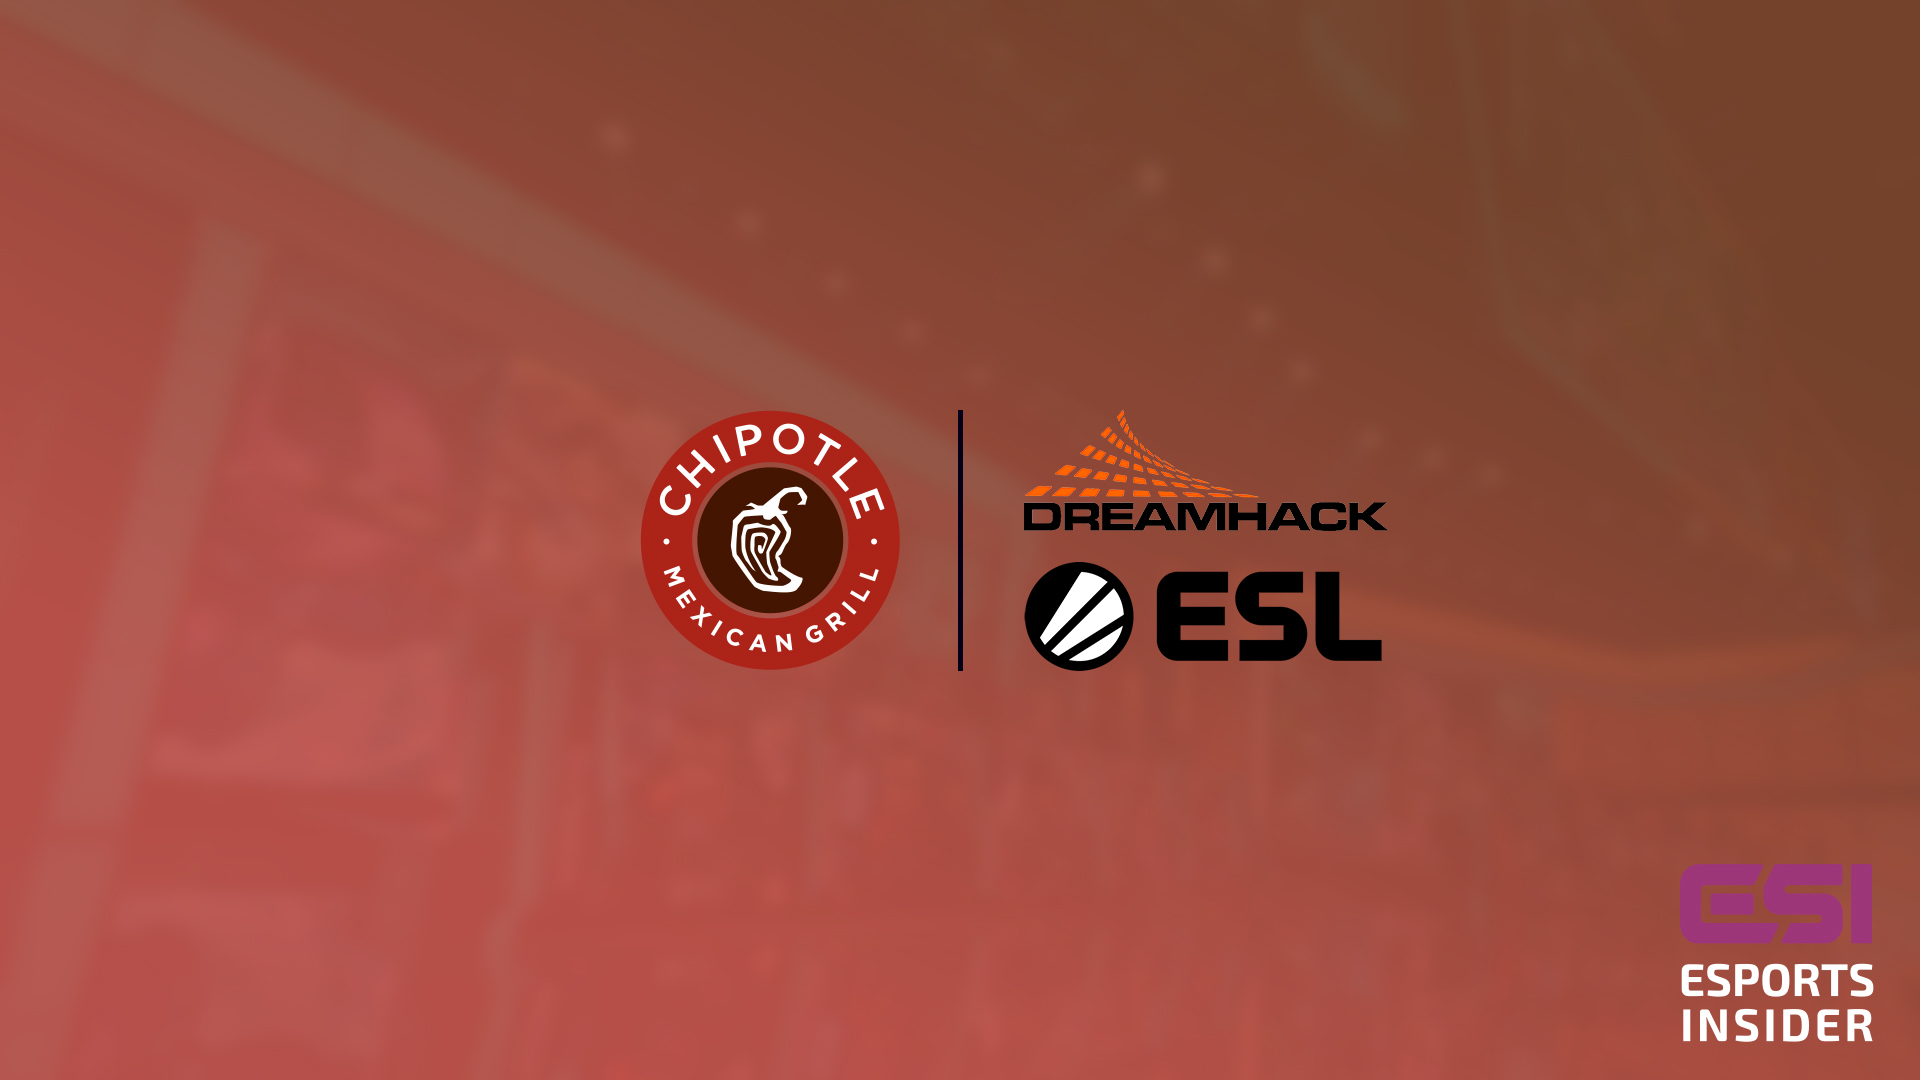 Chipotle Teams With Esl And Dreamhack For Challenger Series